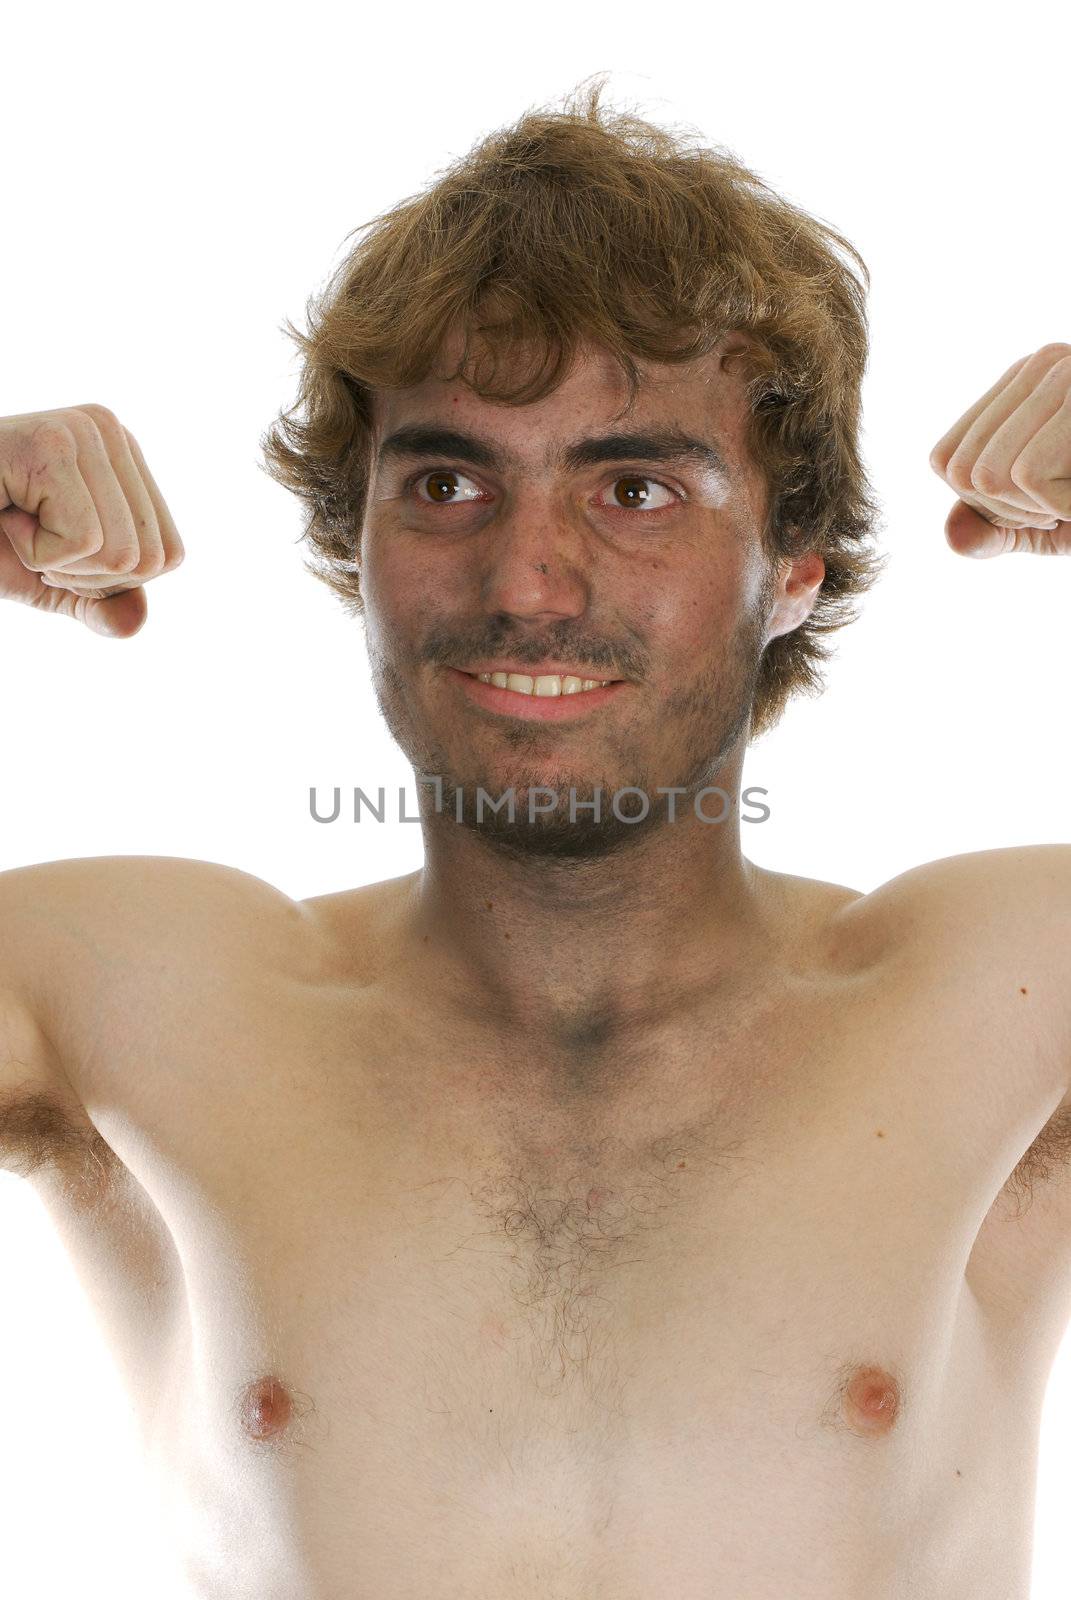 dirty man - dirty young tough man making fists on white background